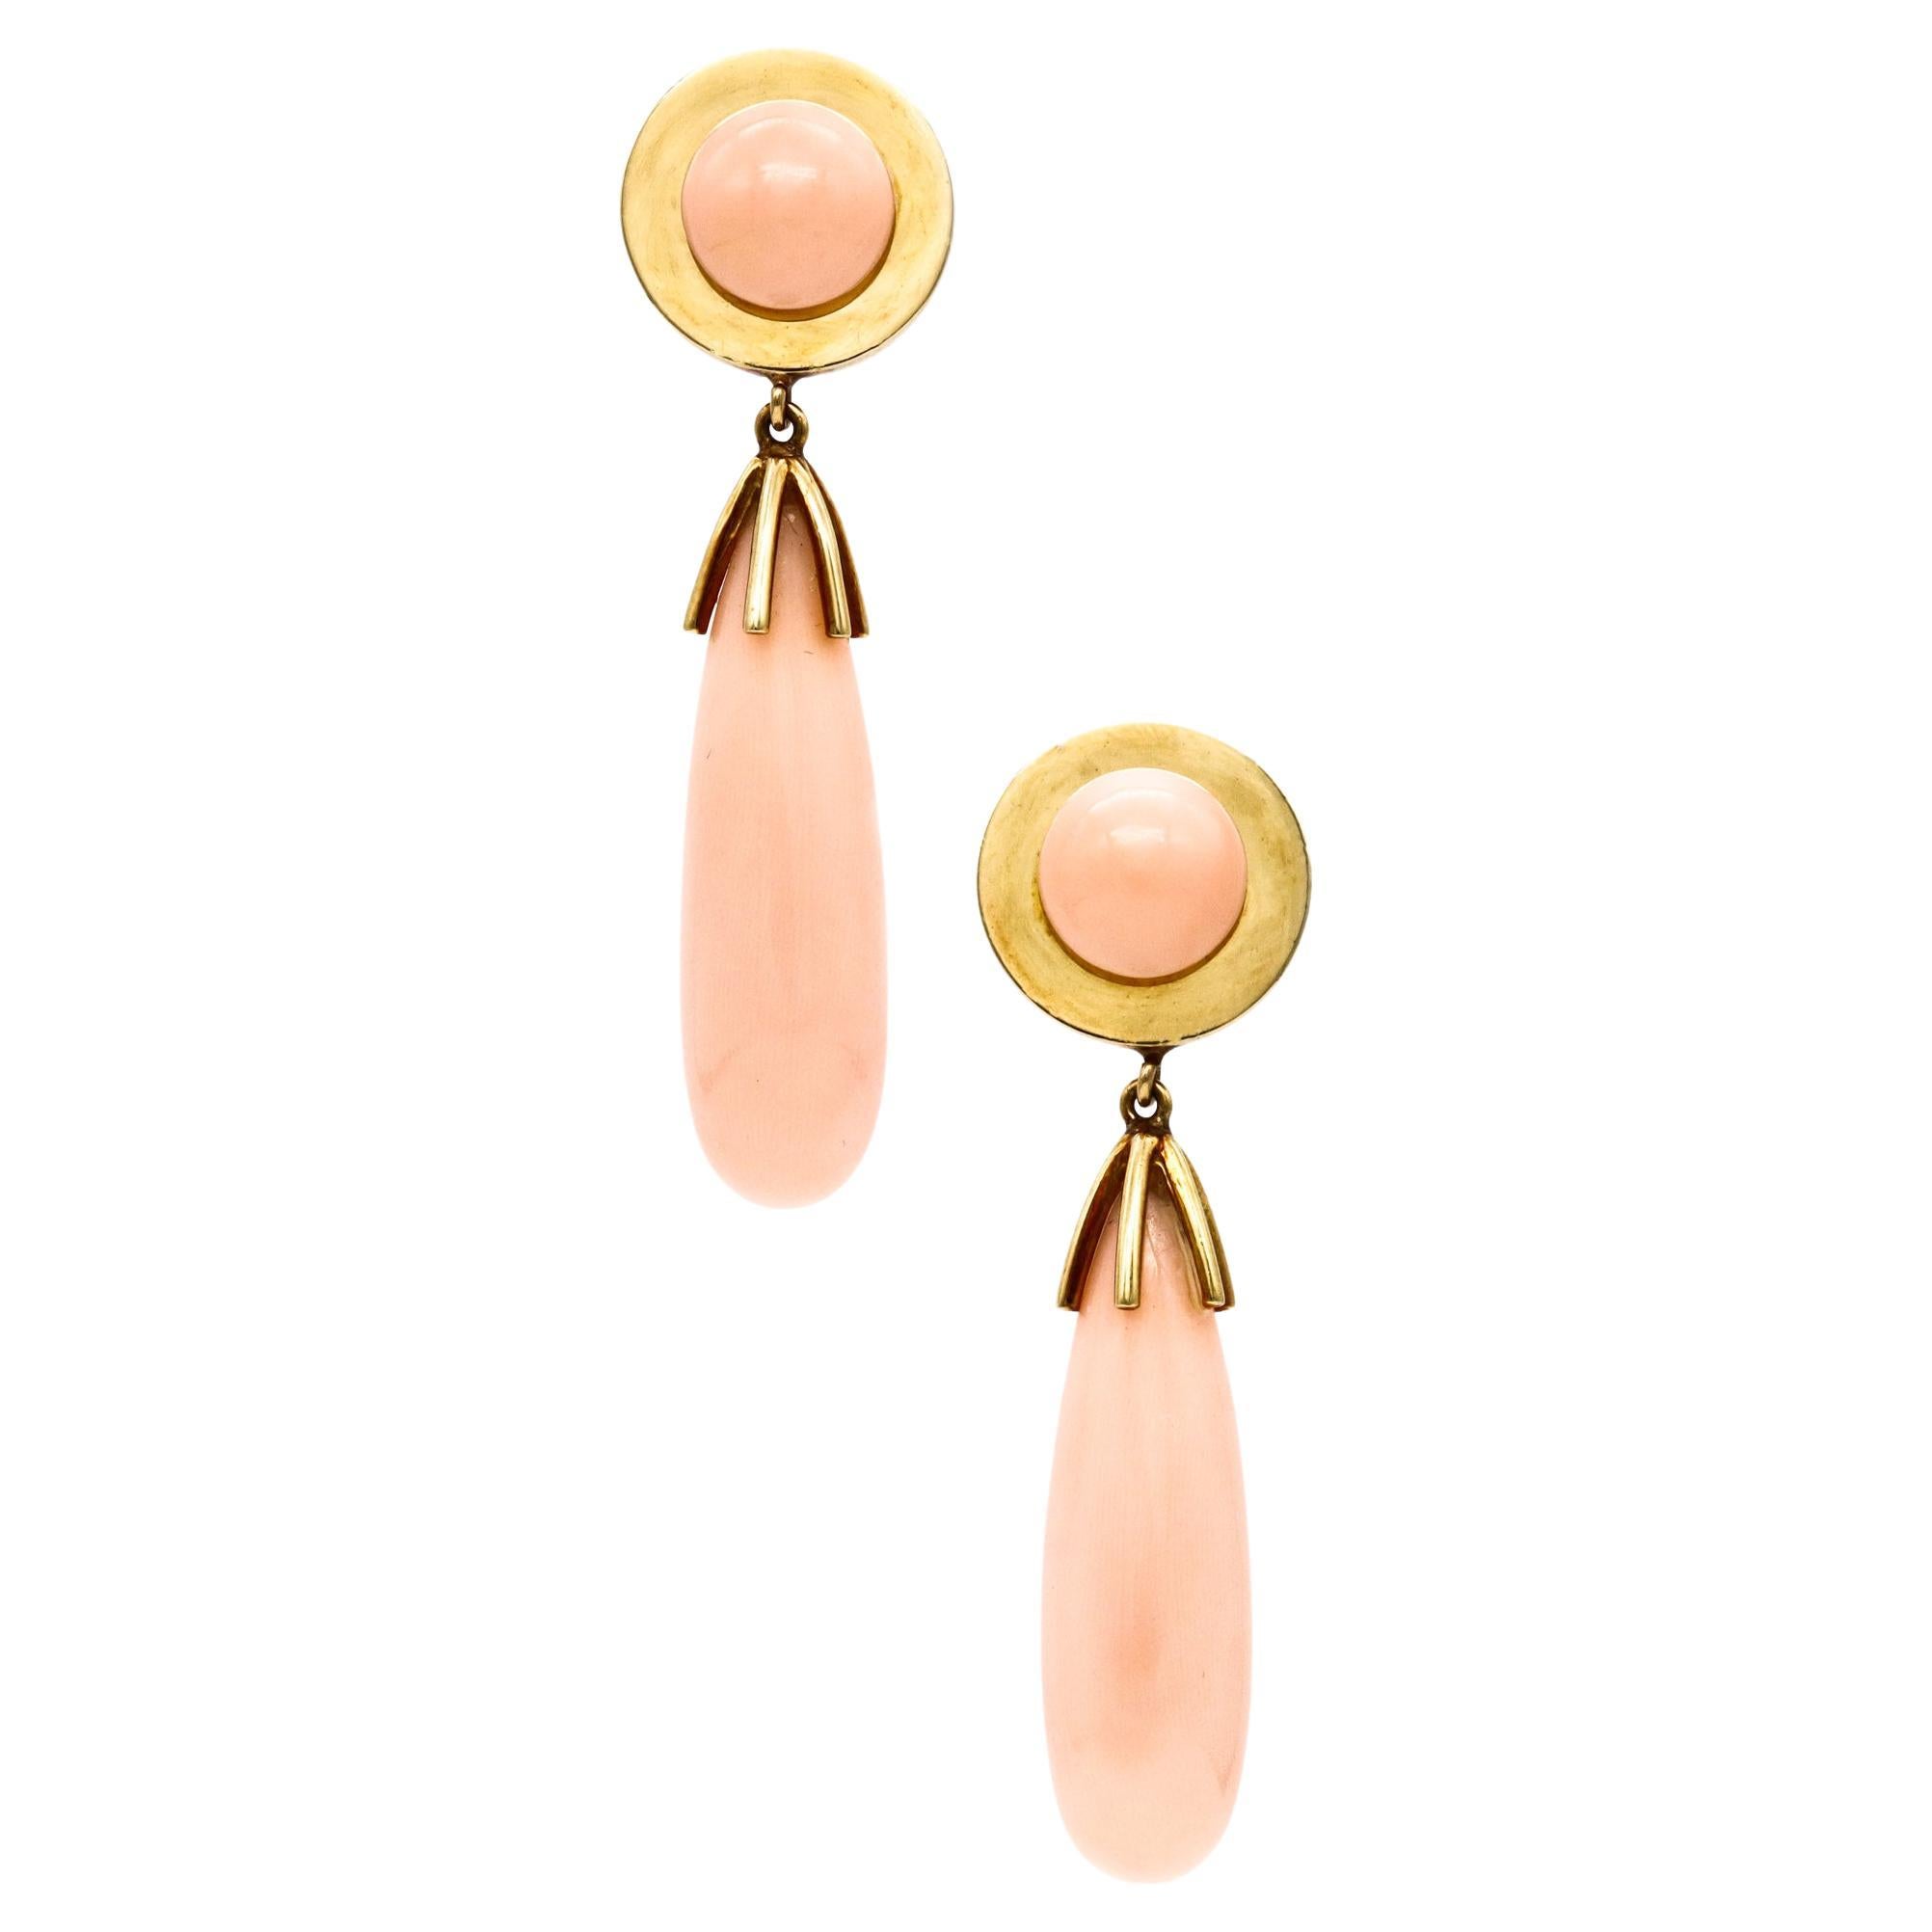 Cellino 1960 Italy Long Earrings 18Kt Yellow Gold with Angel's Skin Corals Drops For Sale